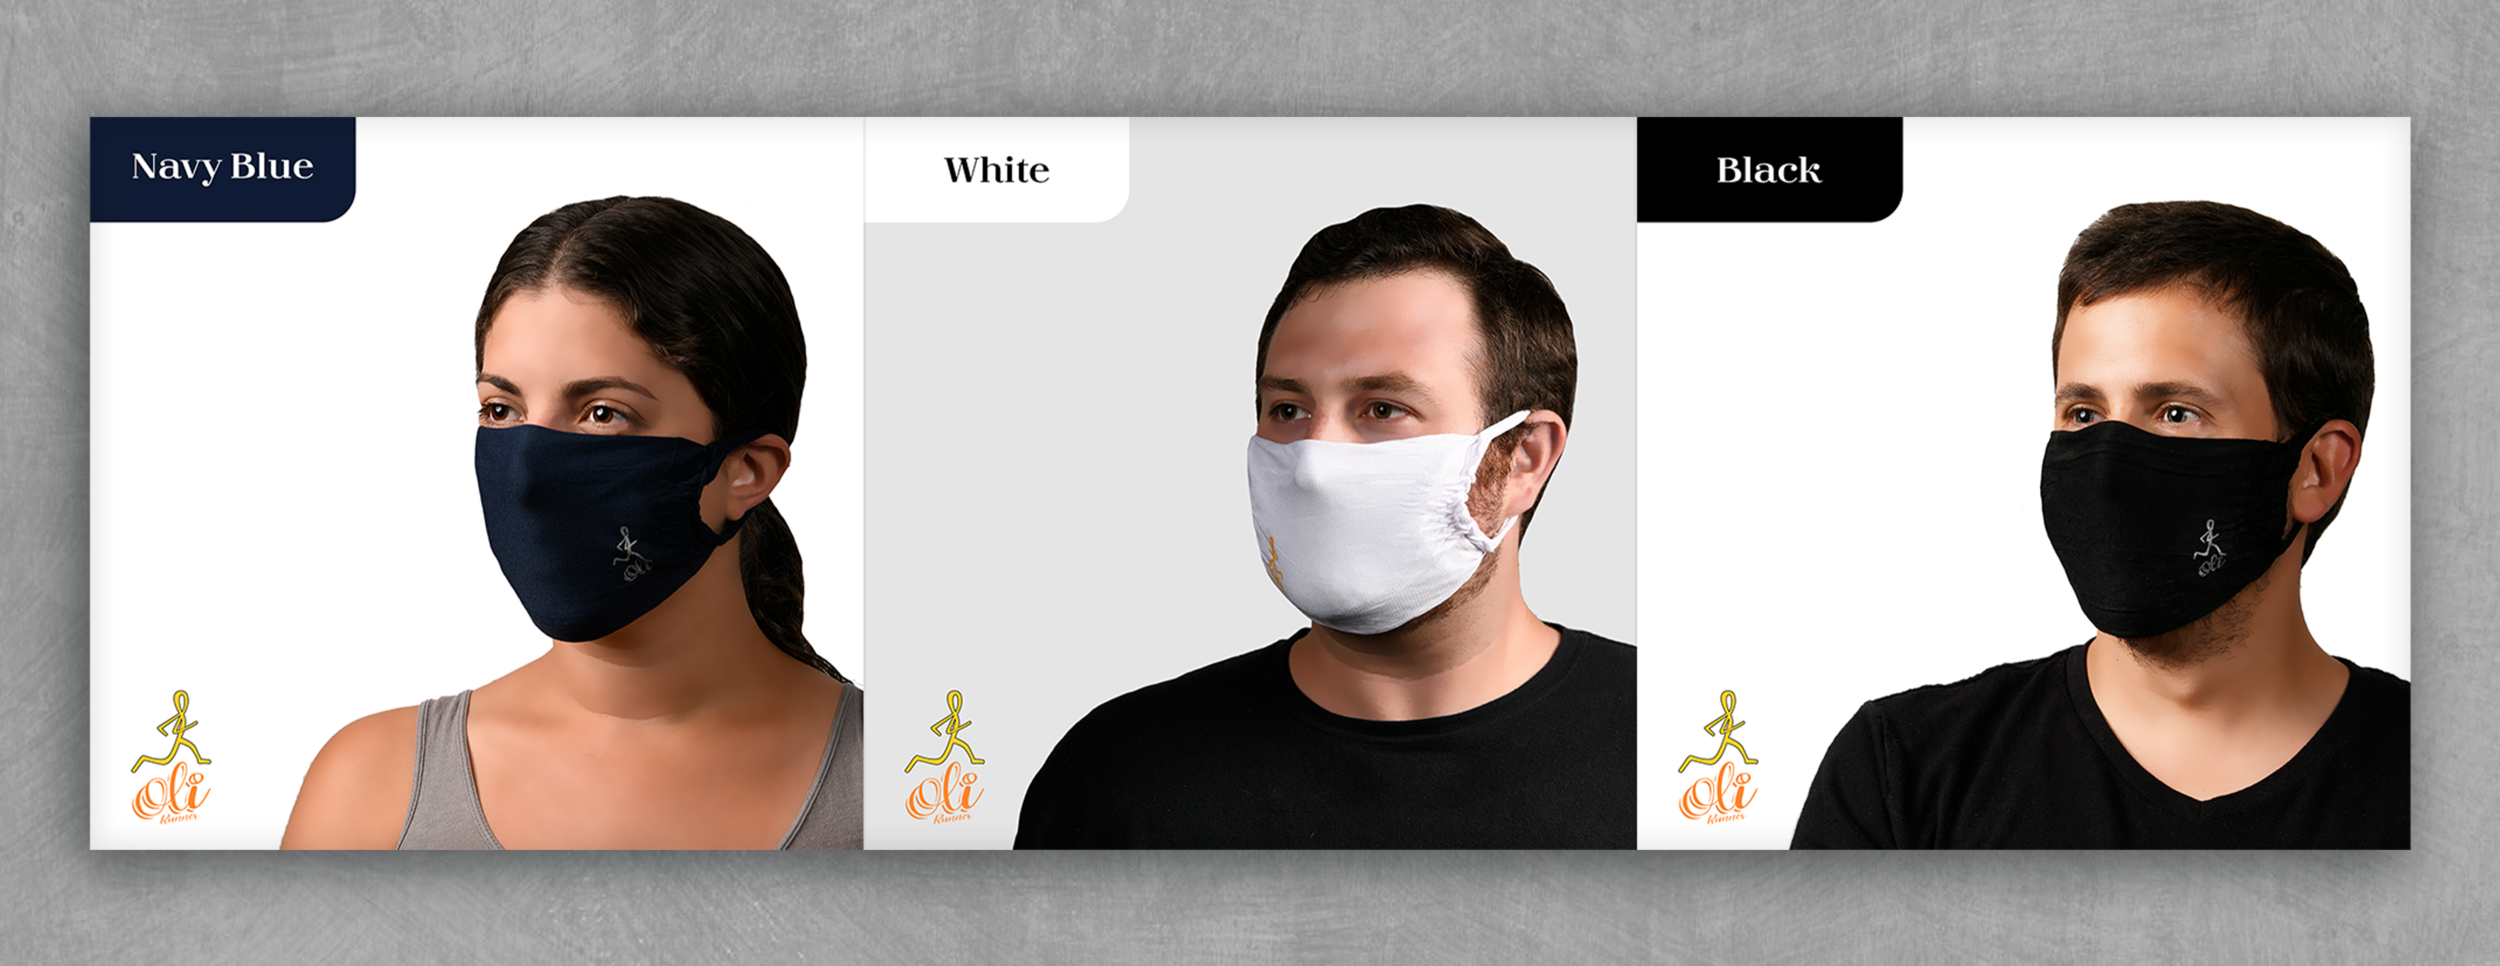 mask-product-graphic-photoshoot-oli-runner-sports-colors.png